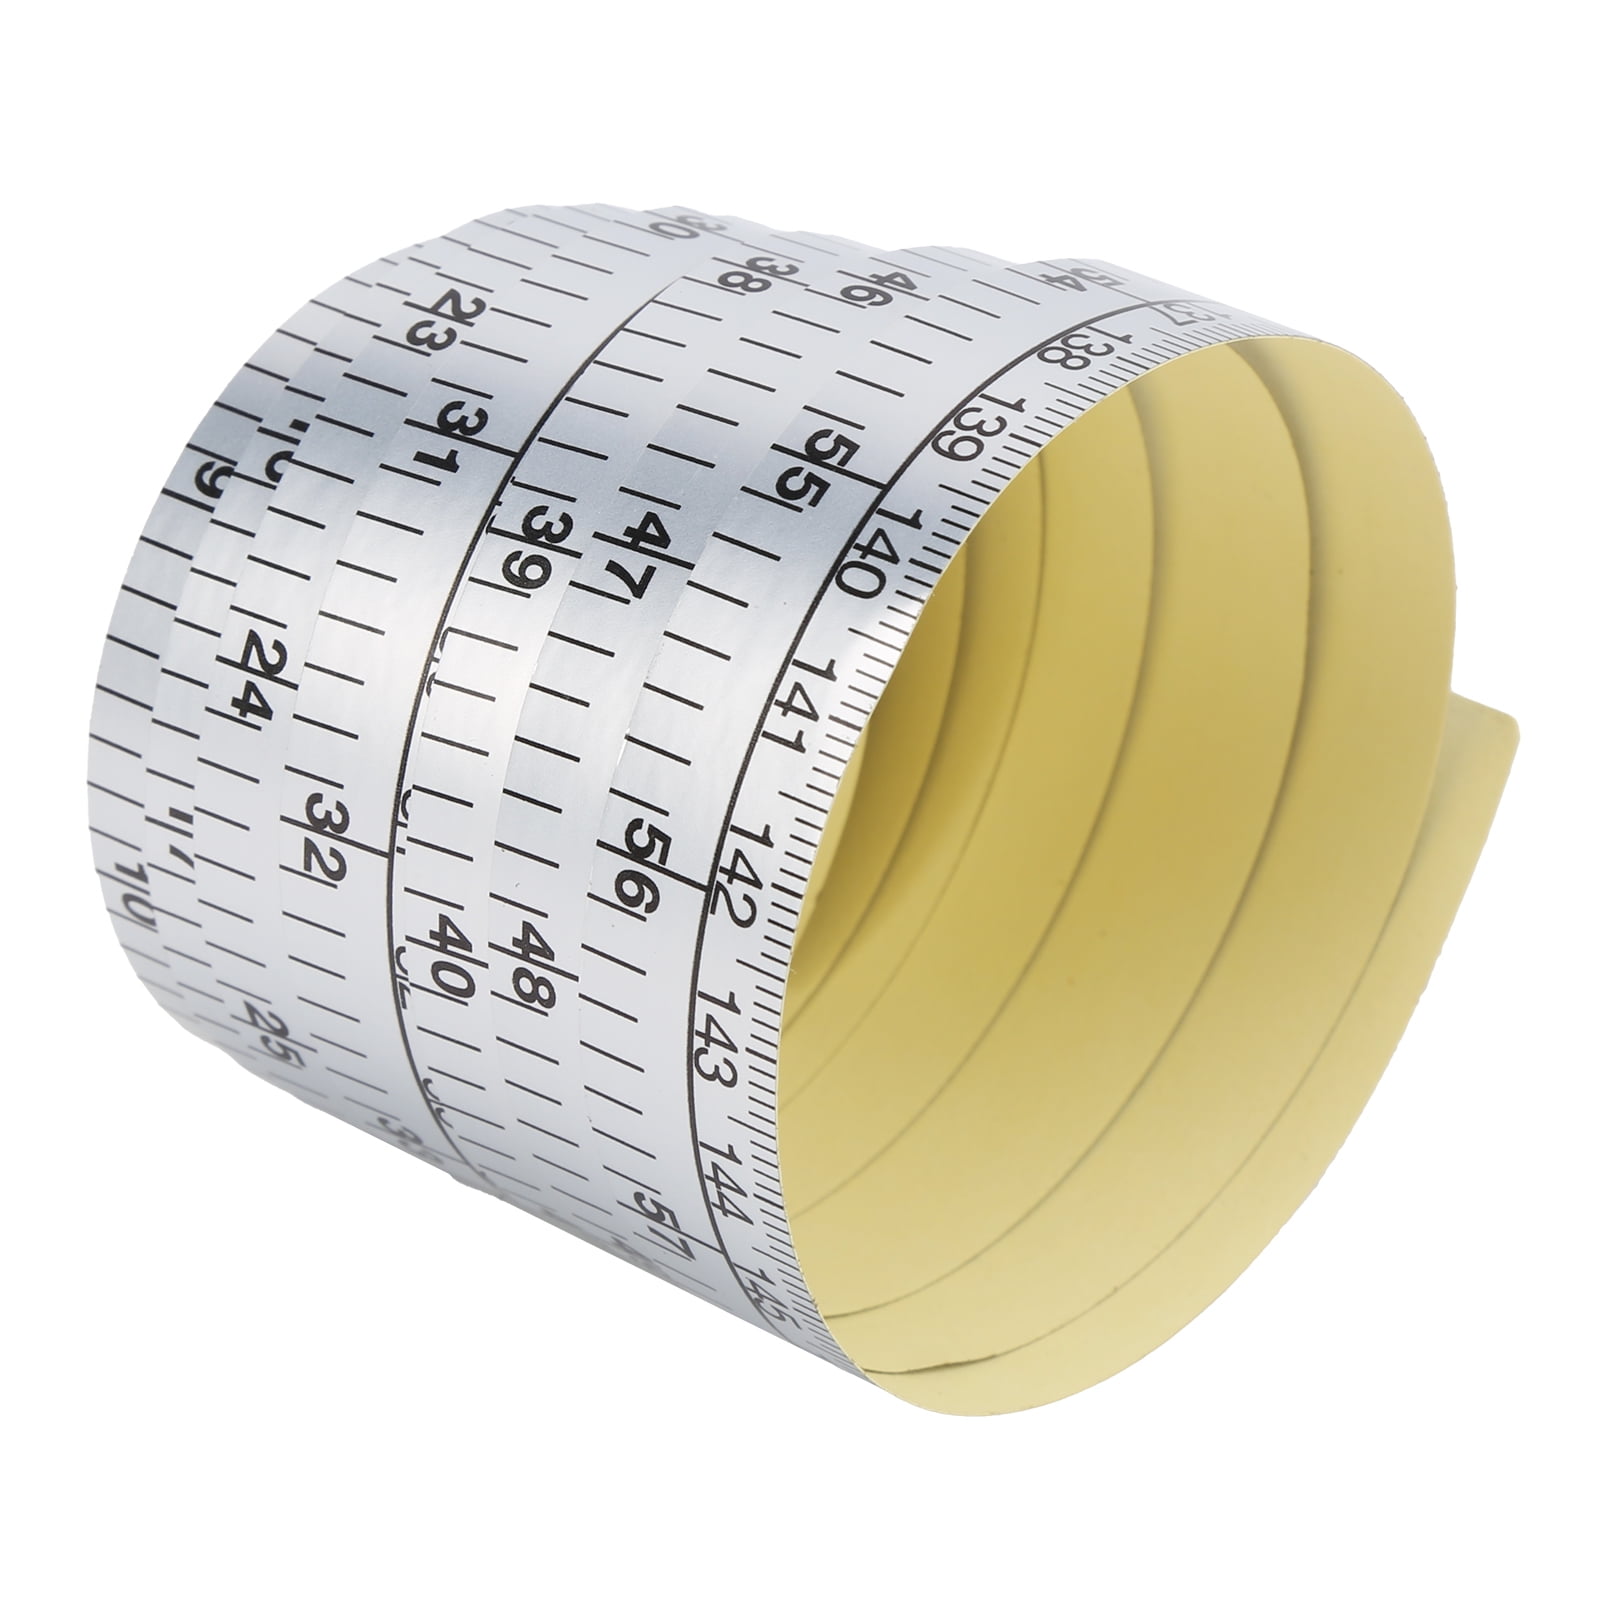 Adhesive Ruler Tape - 60” 2-Pack, Perfect for Your Sewing Table!